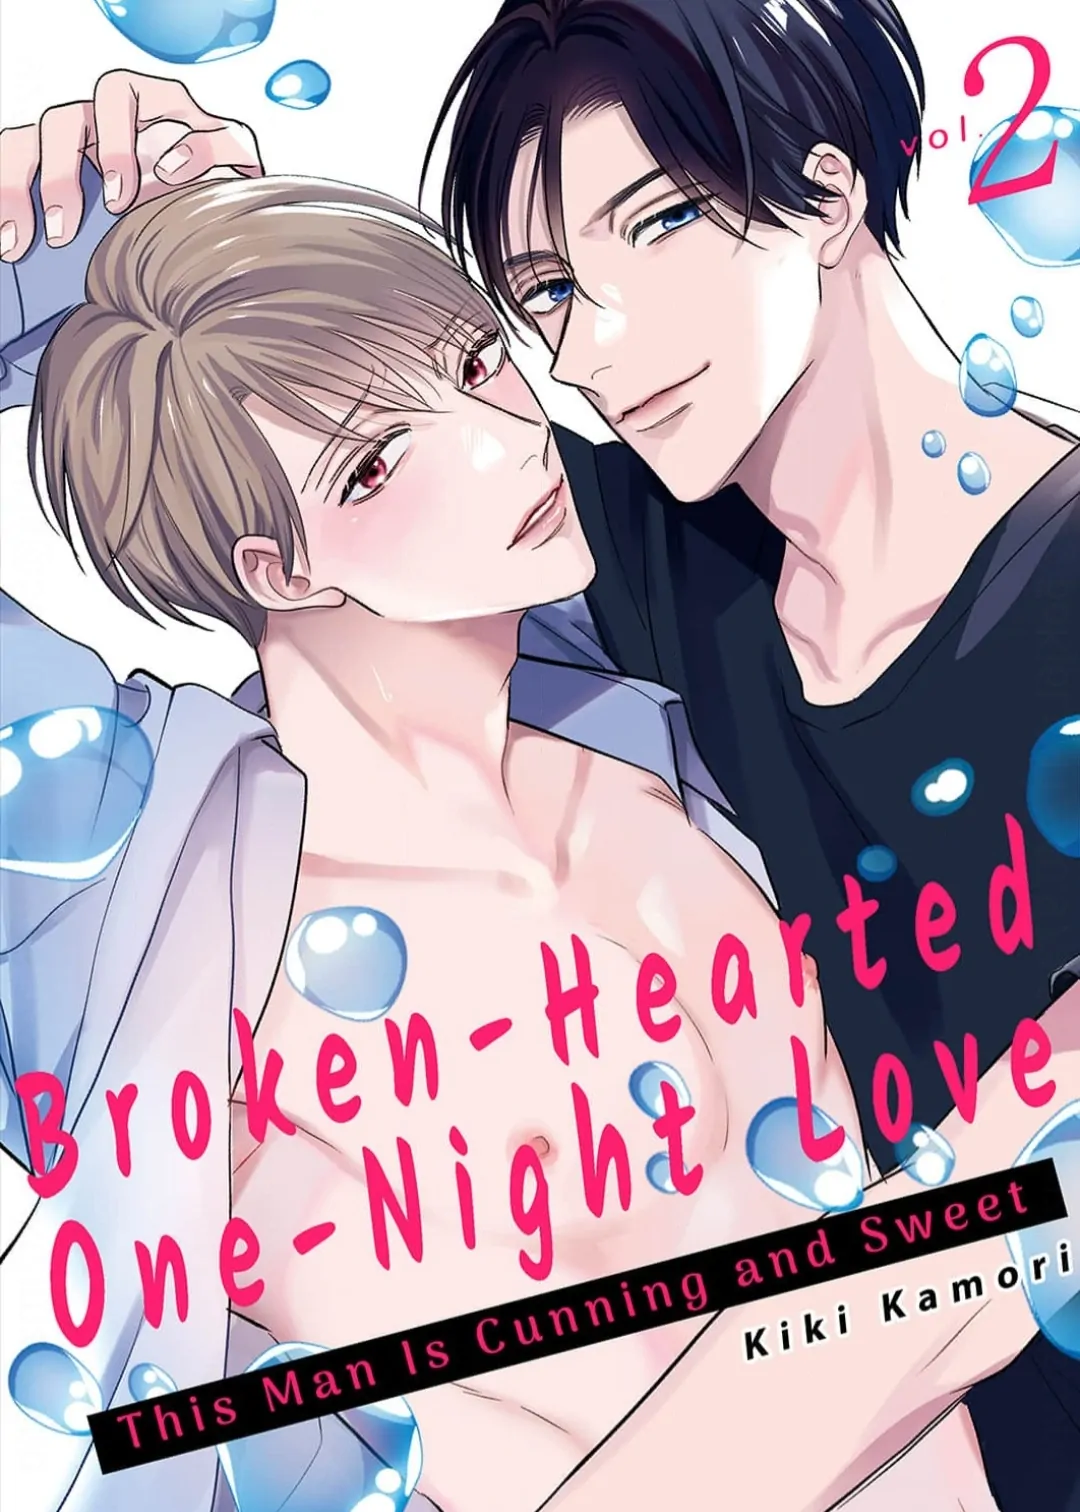 Broken-Hearted One-Night Love ~This Man Is Cunning and Sweet~ - chapter 2 - #1